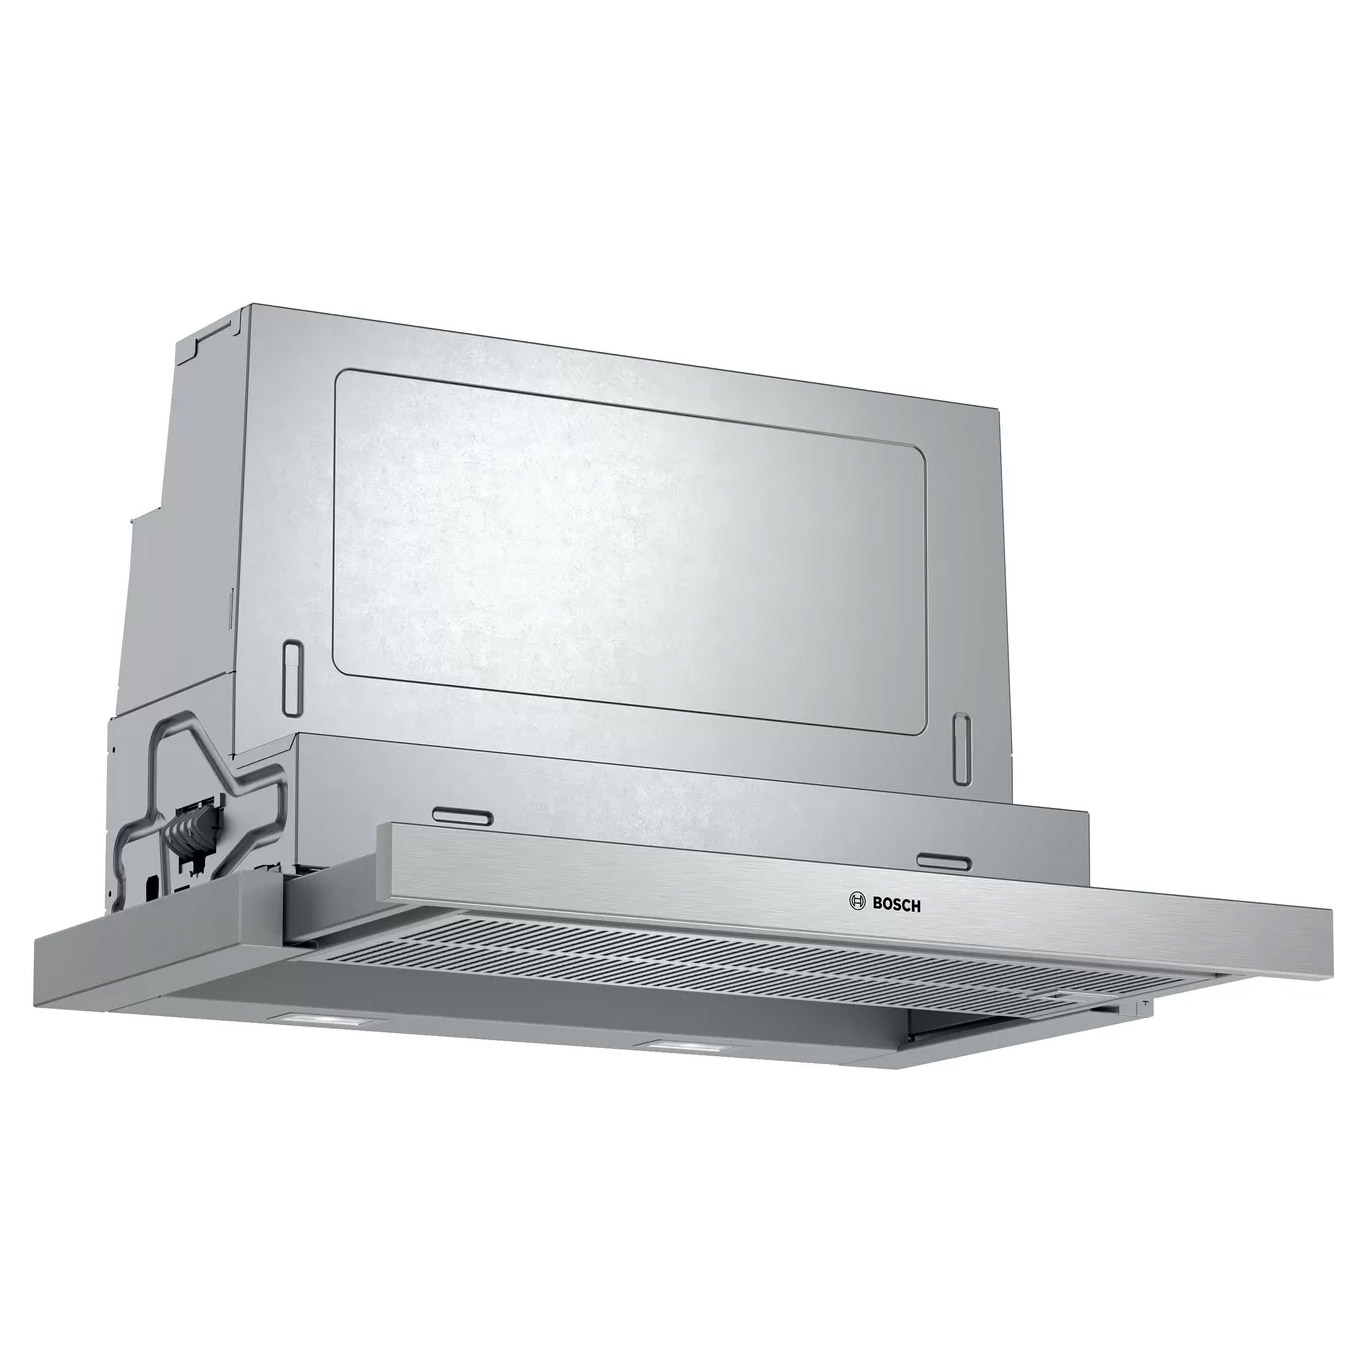 Image of Bosch DFS067A51B Series 4 60cm Telescopic Cooker Hood in Silver